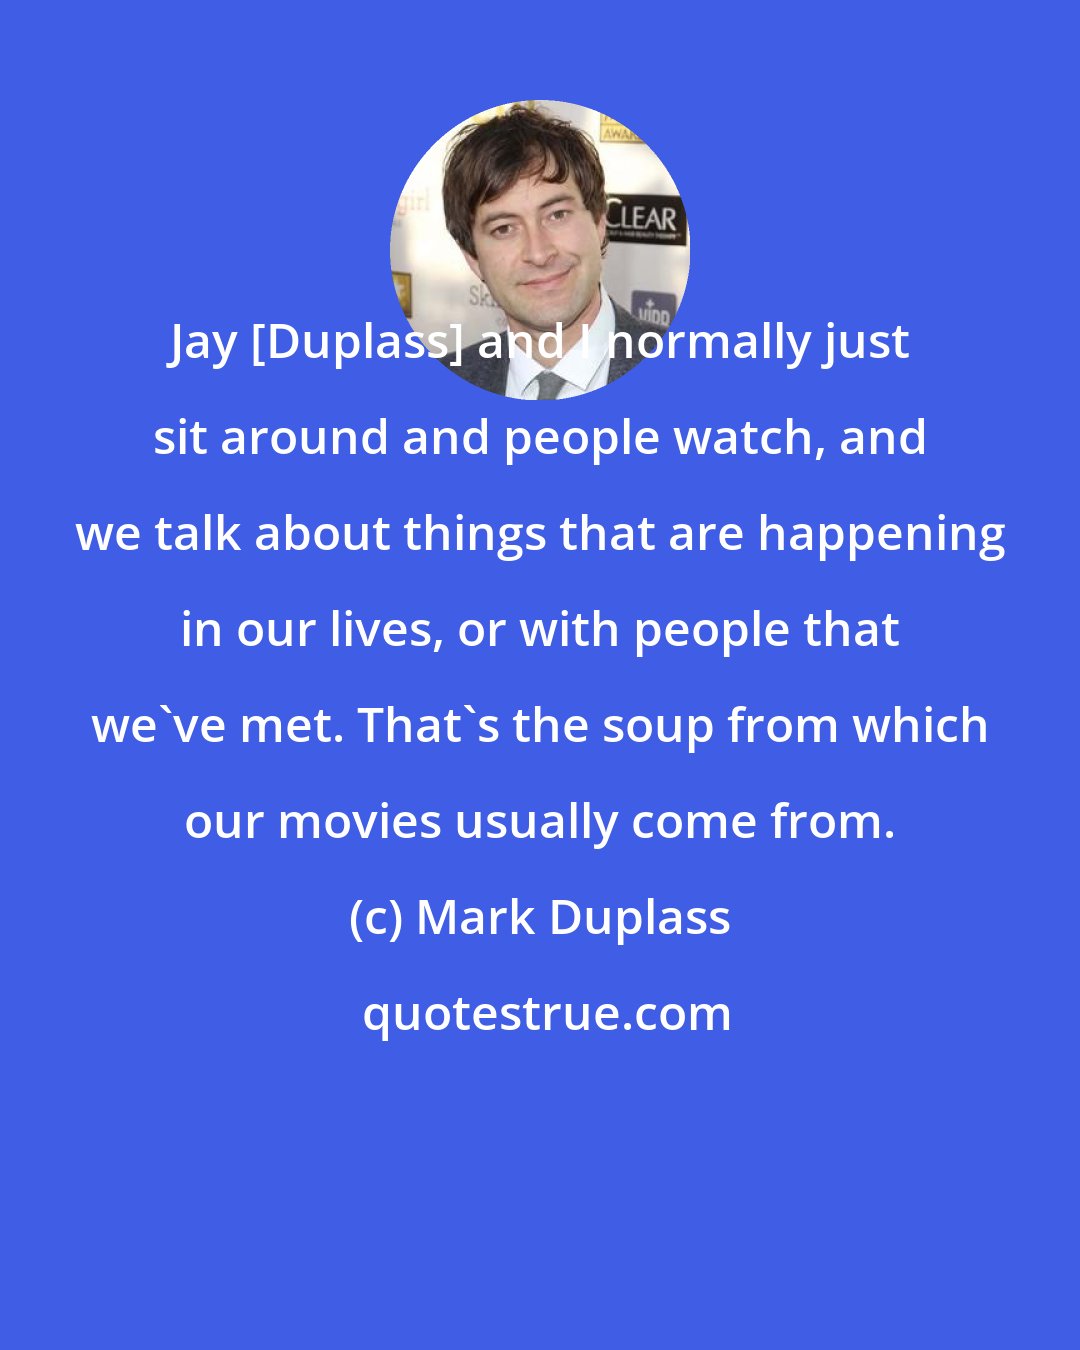 Mark Duplass: Jay [Duplass] and I normally just sit around and people watch, and we talk about things that are happening in our lives, or with people that we've met. That's the soup from which our movies usually come from.